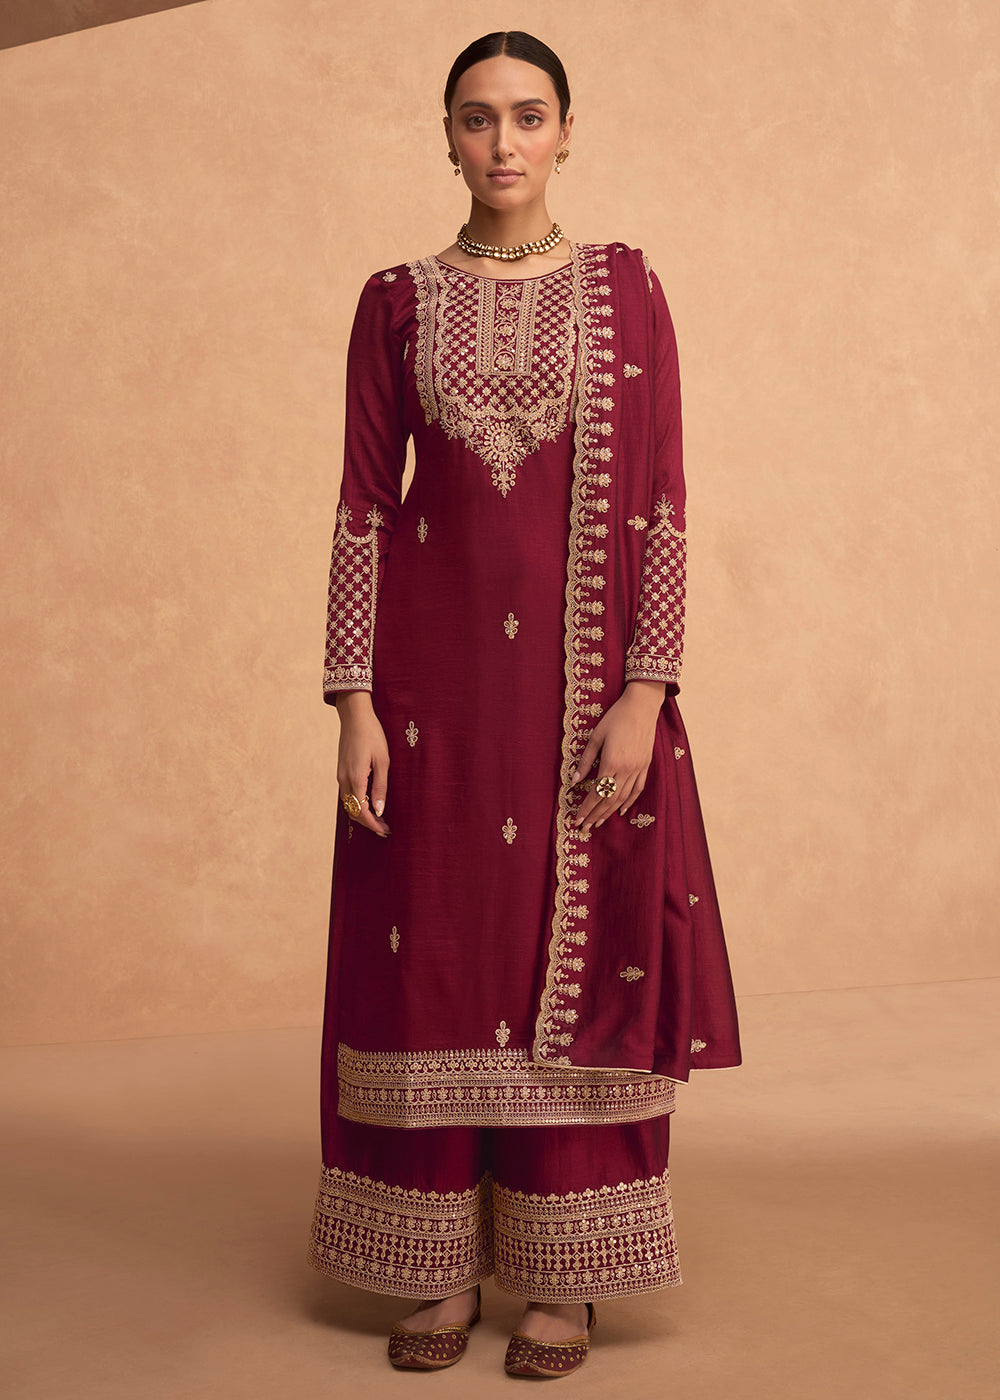 Buy Now Pretty Maroon Premium Silk Embroidered Indian Palazzo Salwar Suit Online in USA, UK, Canada, Germany & Worldwide at Empress Clothing.